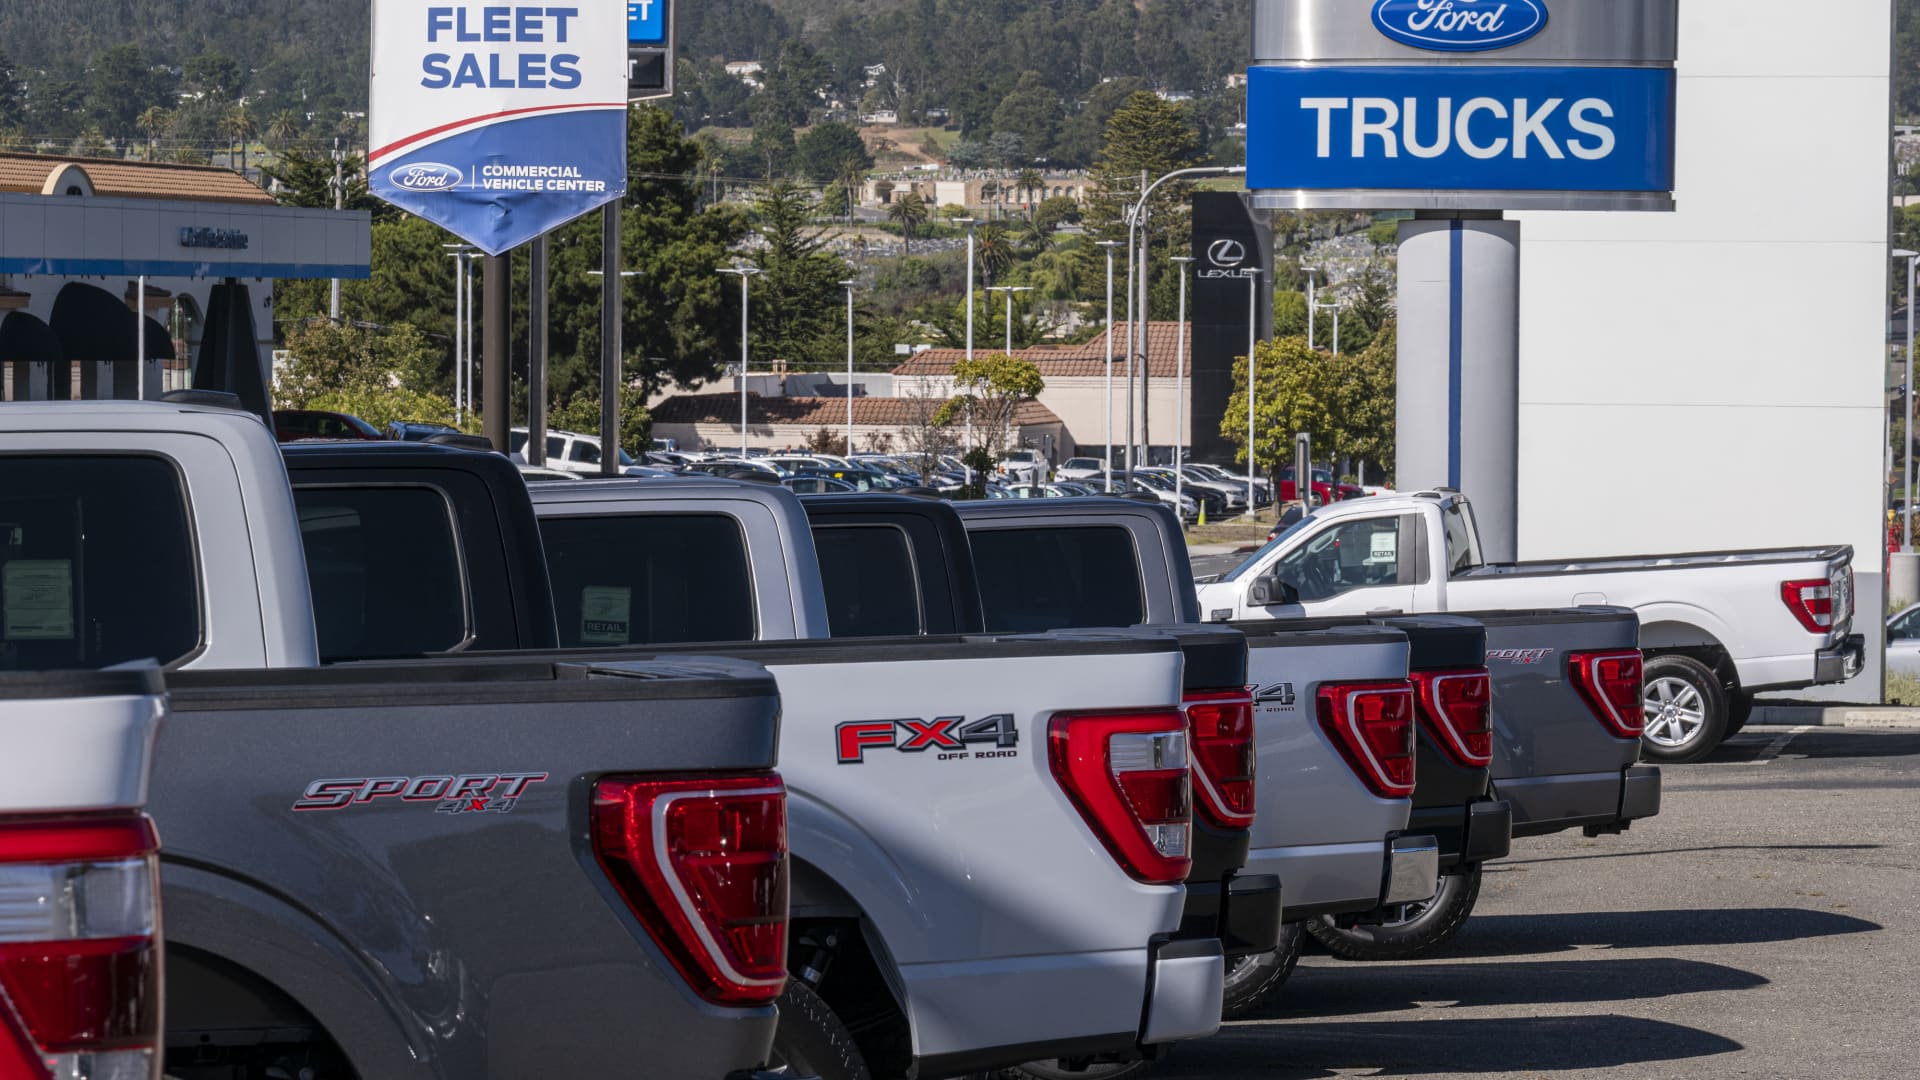 Ford’s October sales slide 10% amid supply chain issues Auto Recent